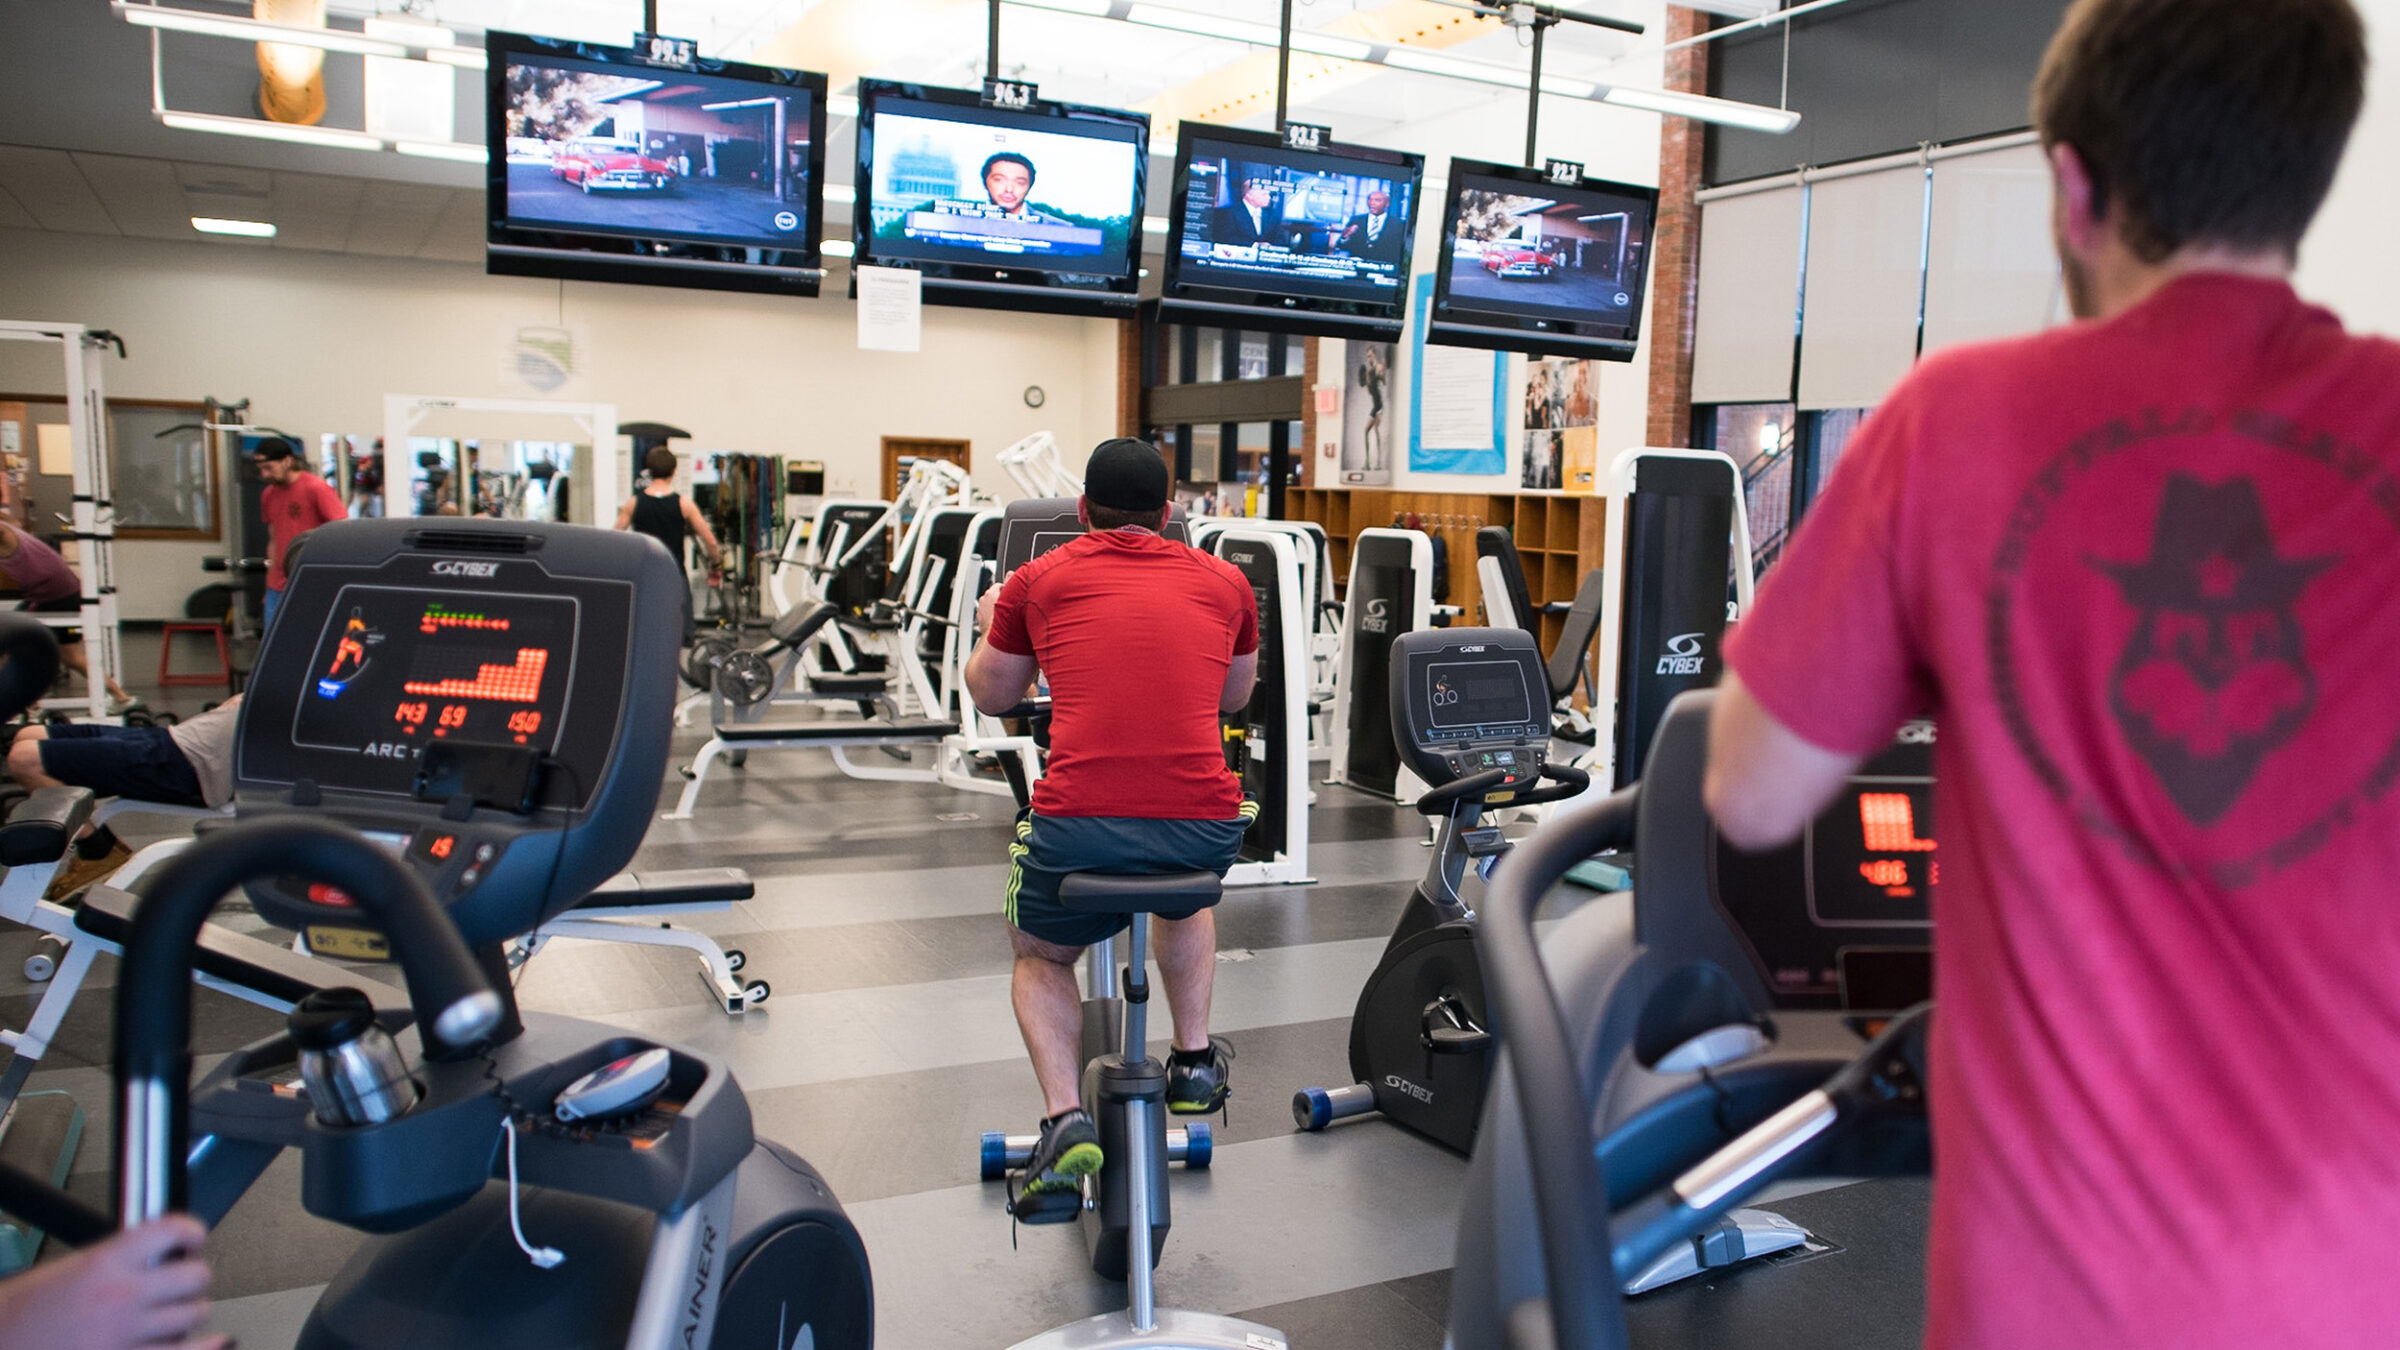 students use equipment while watching tv in the fitness center